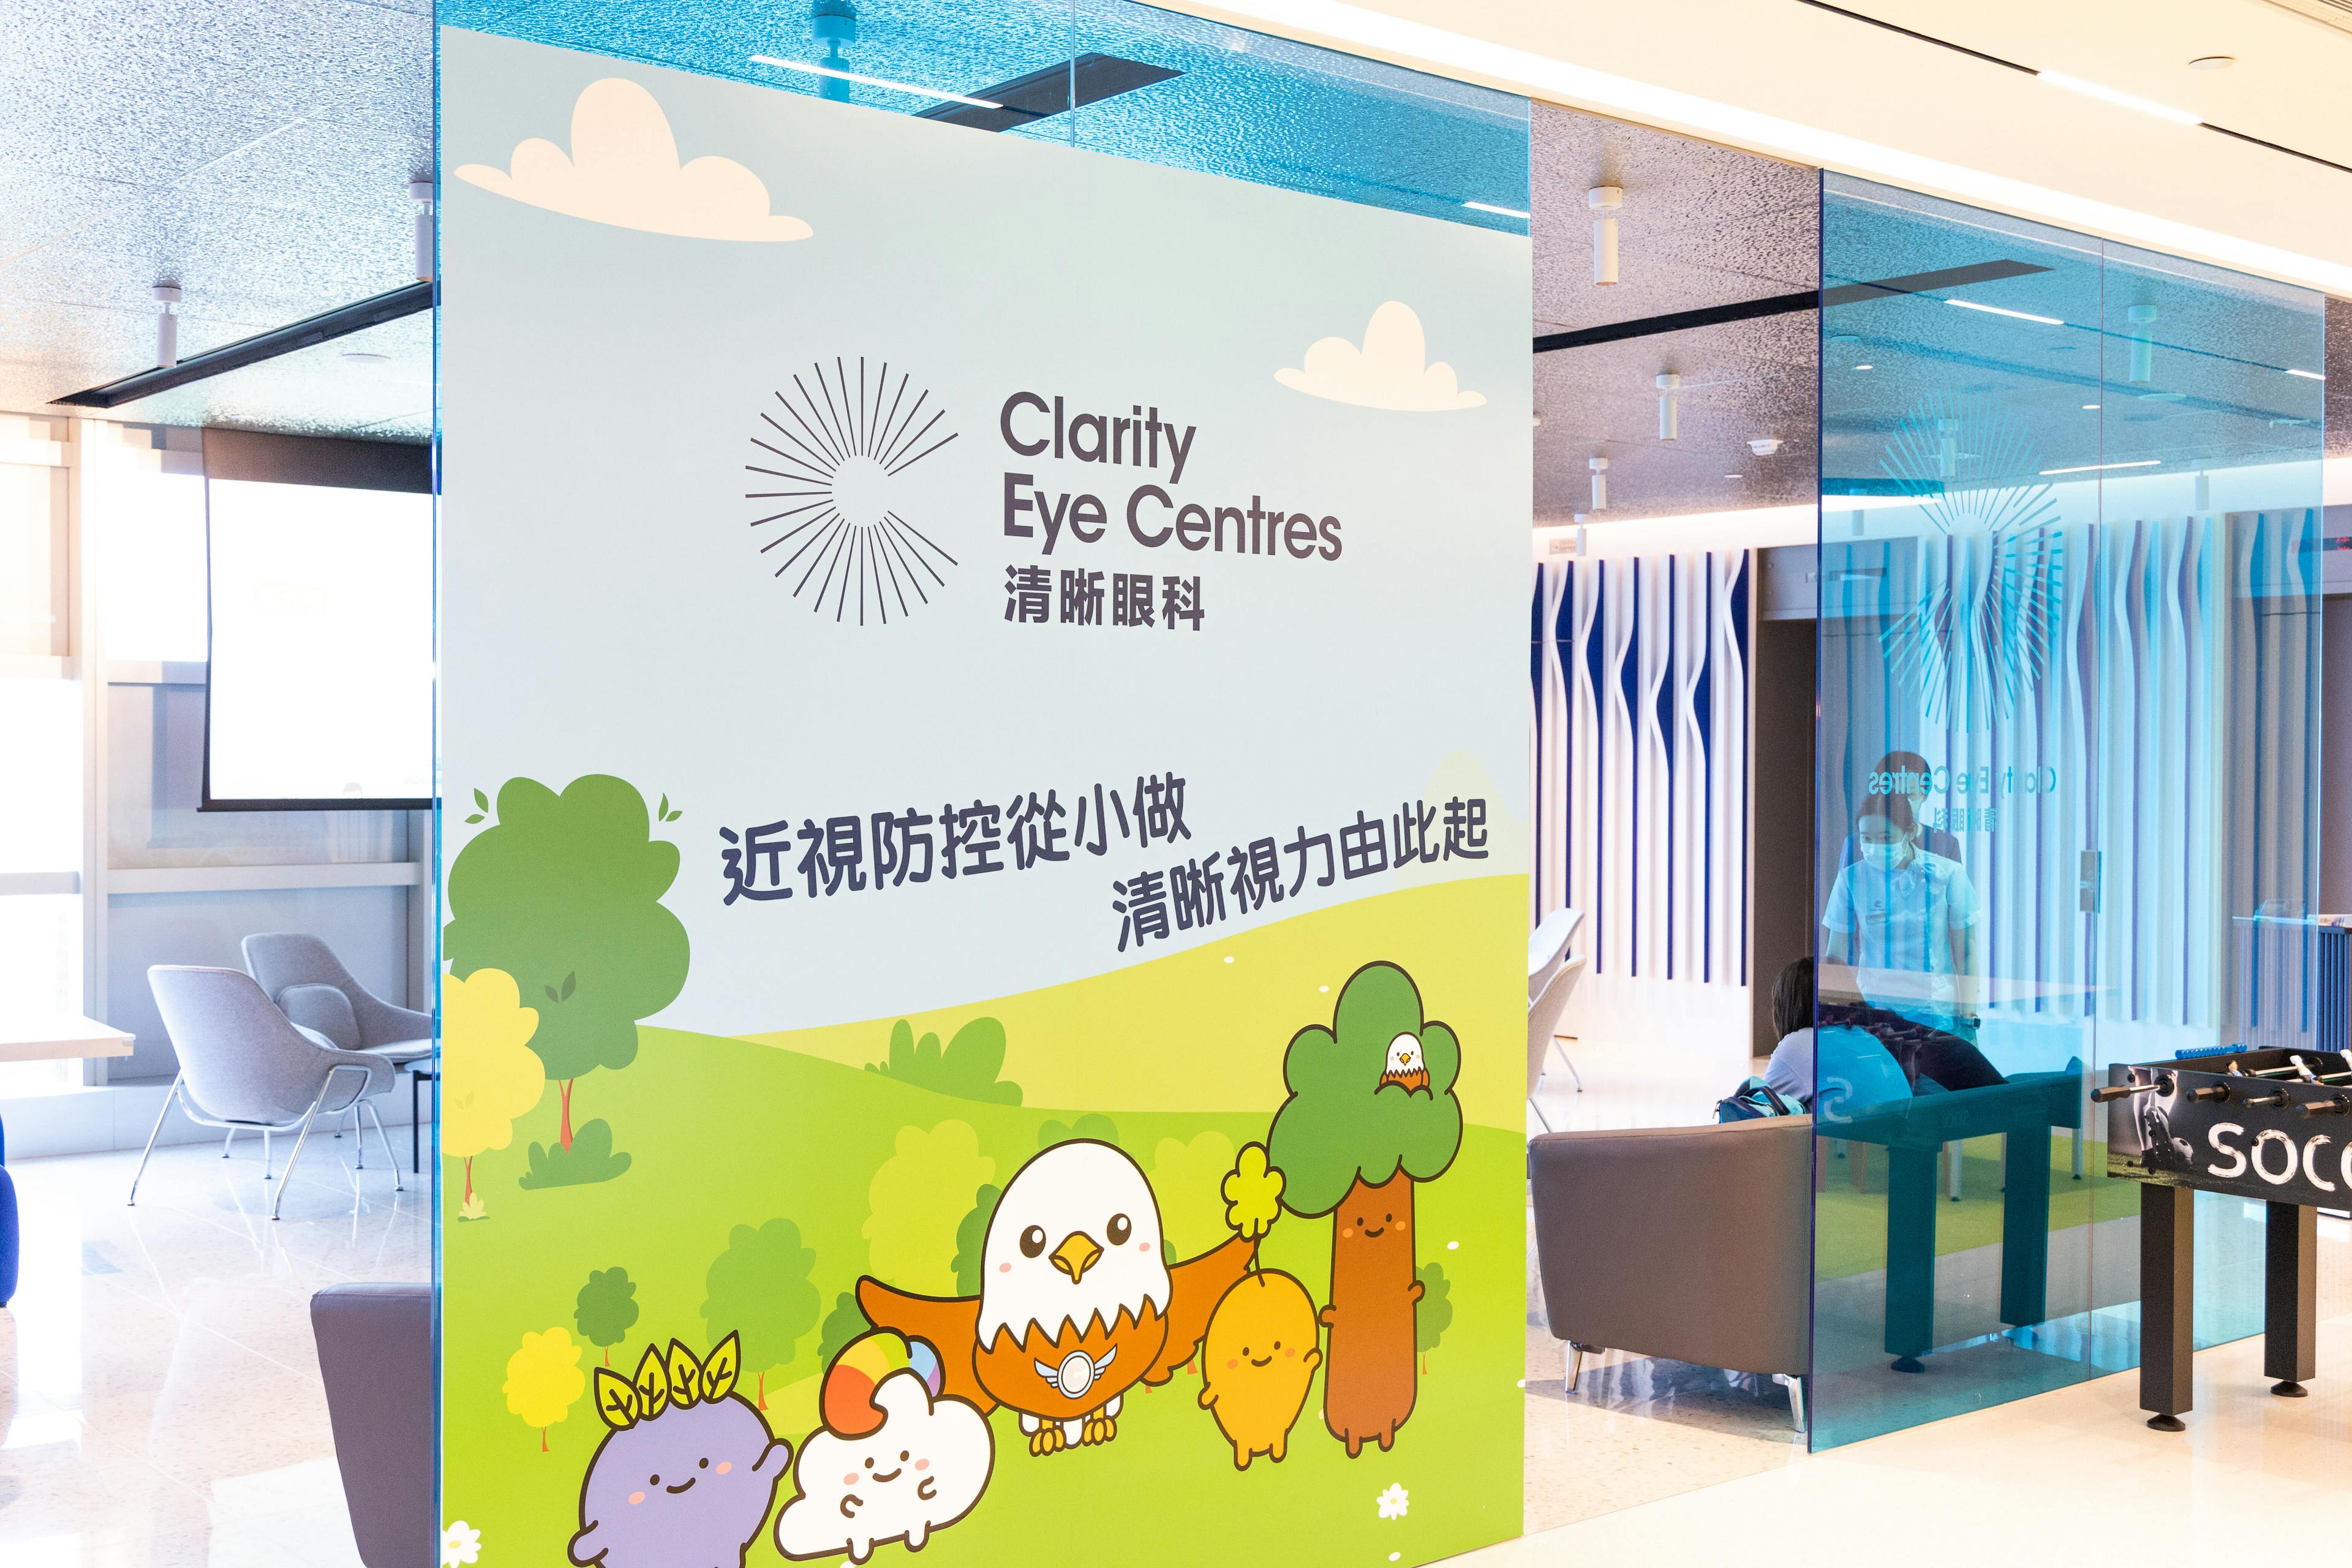 How Clarity Eye Centres gains 45% bookings from WhatsApp enquiries